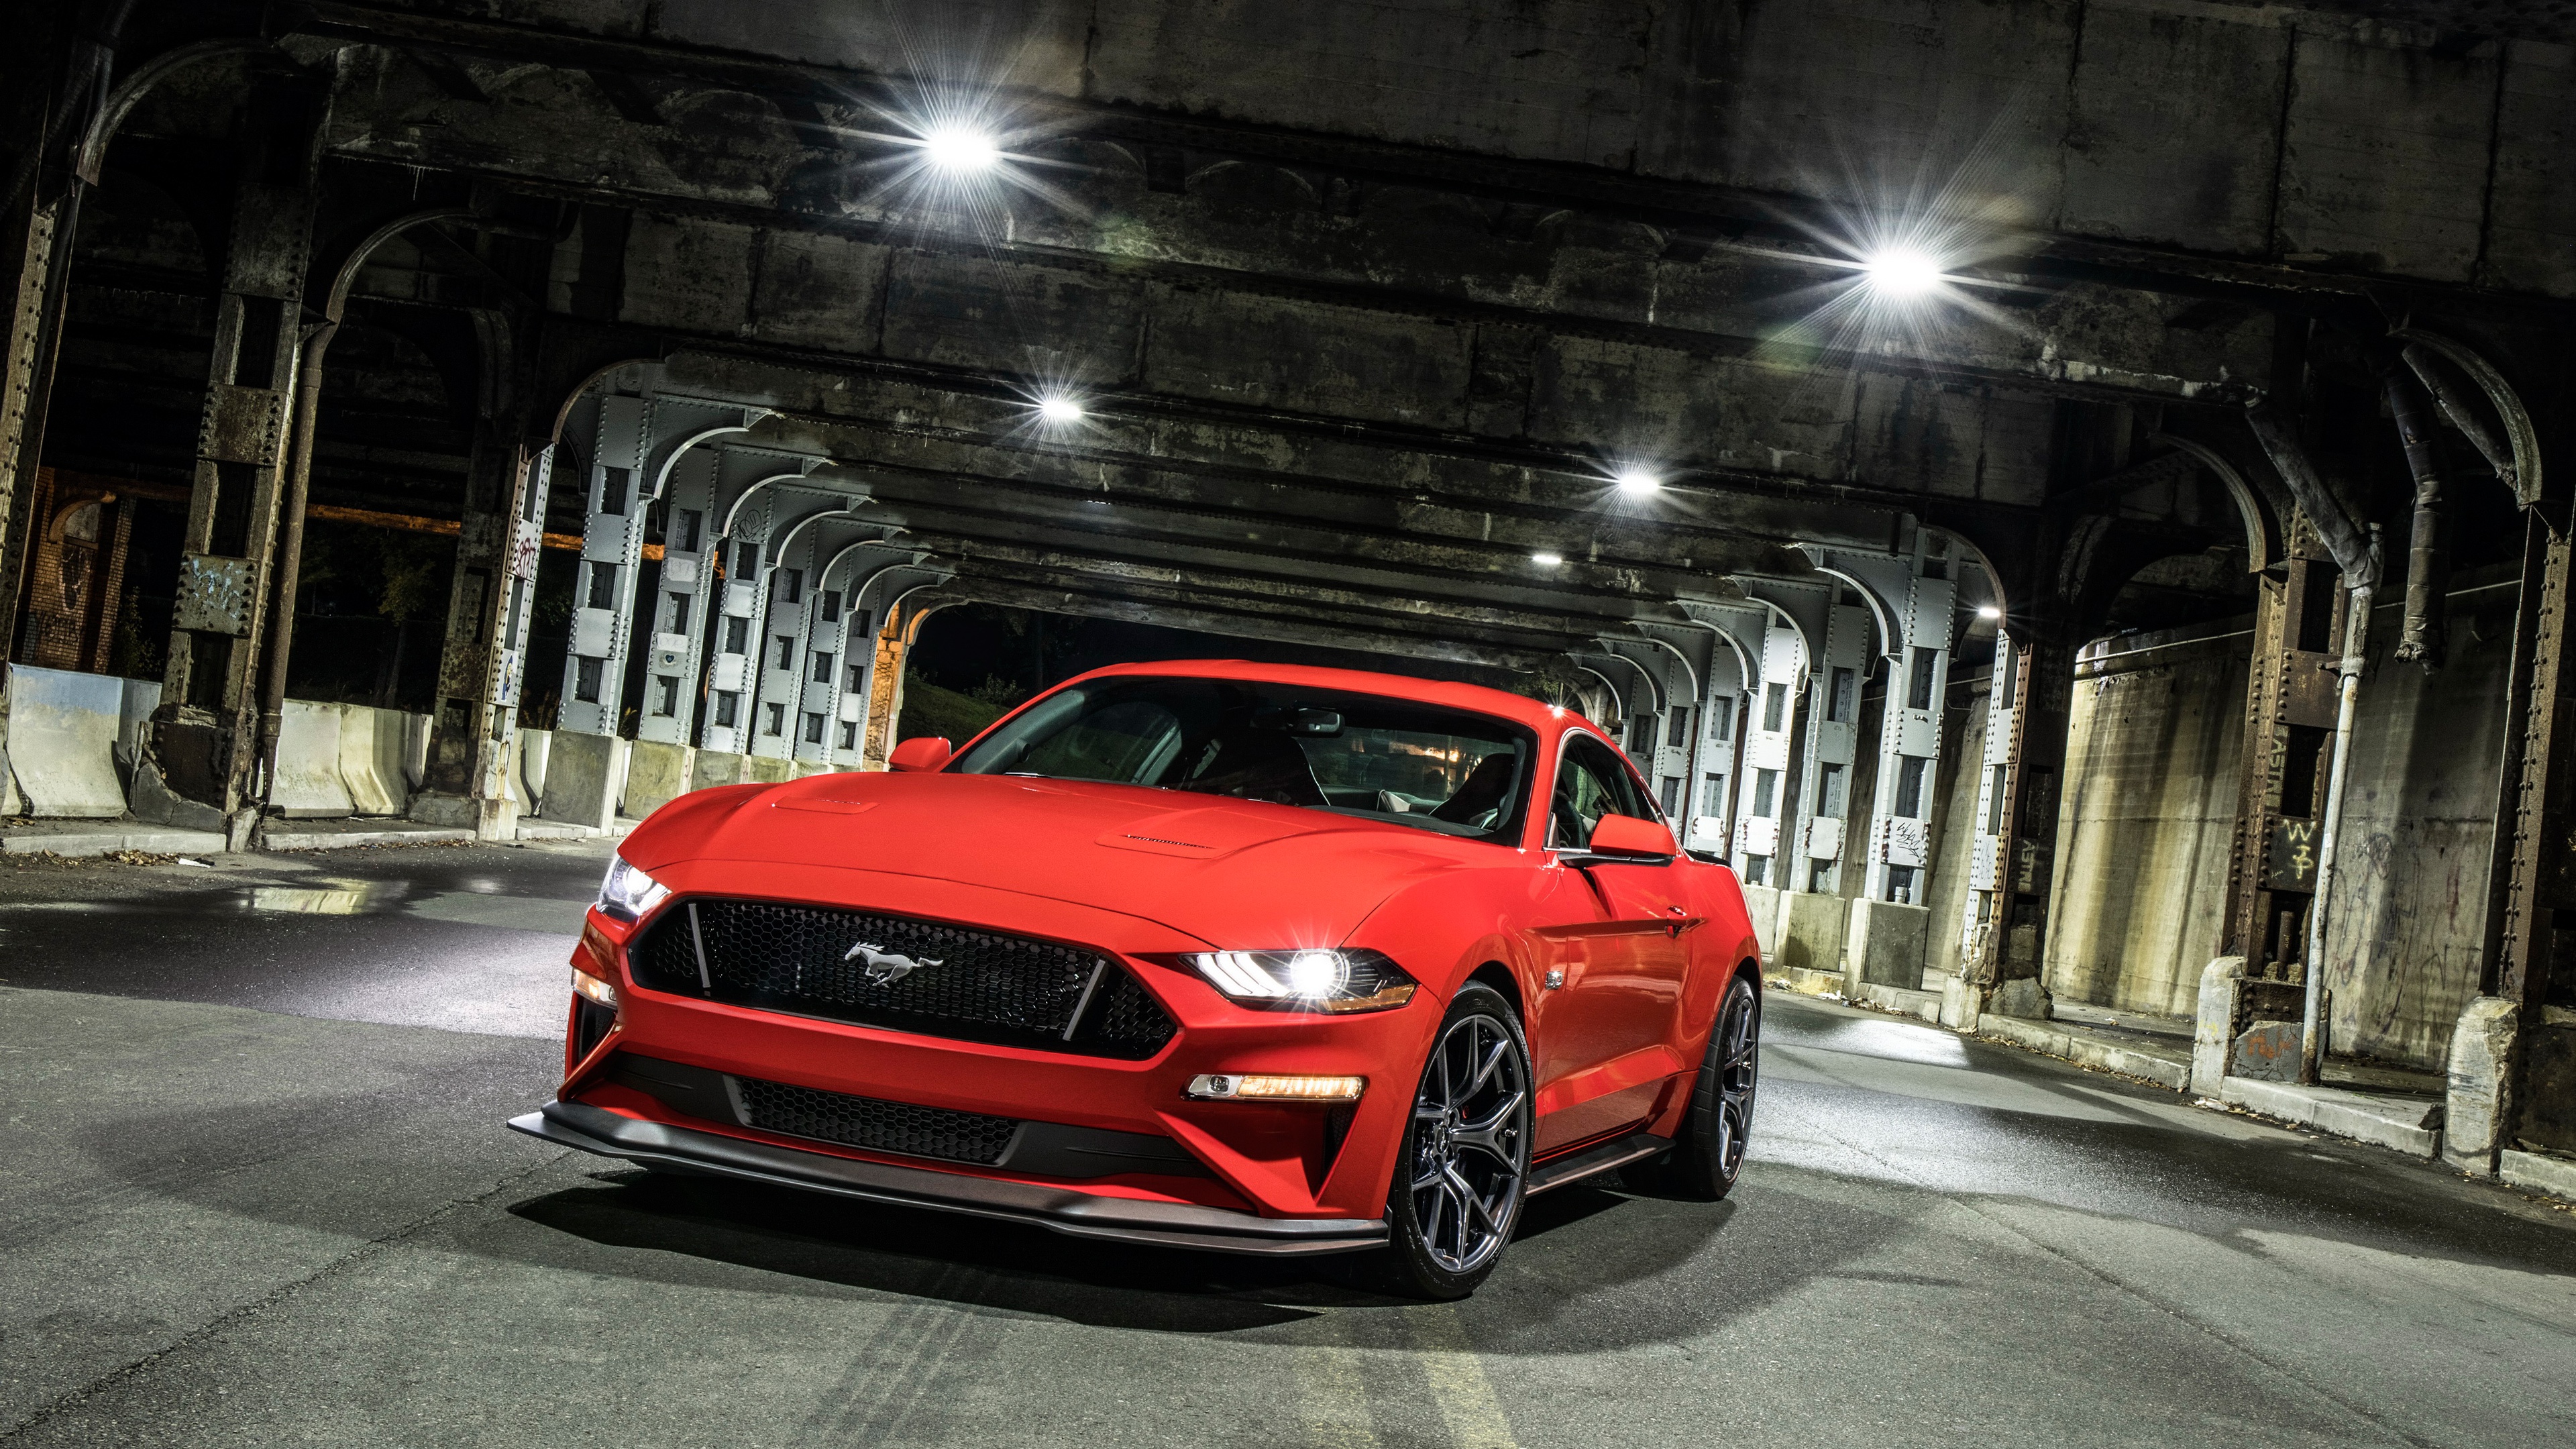 Car Ford Ford Mustang Ford Mustang Gt Muscle Car Red Car Vehicle 3840x2160